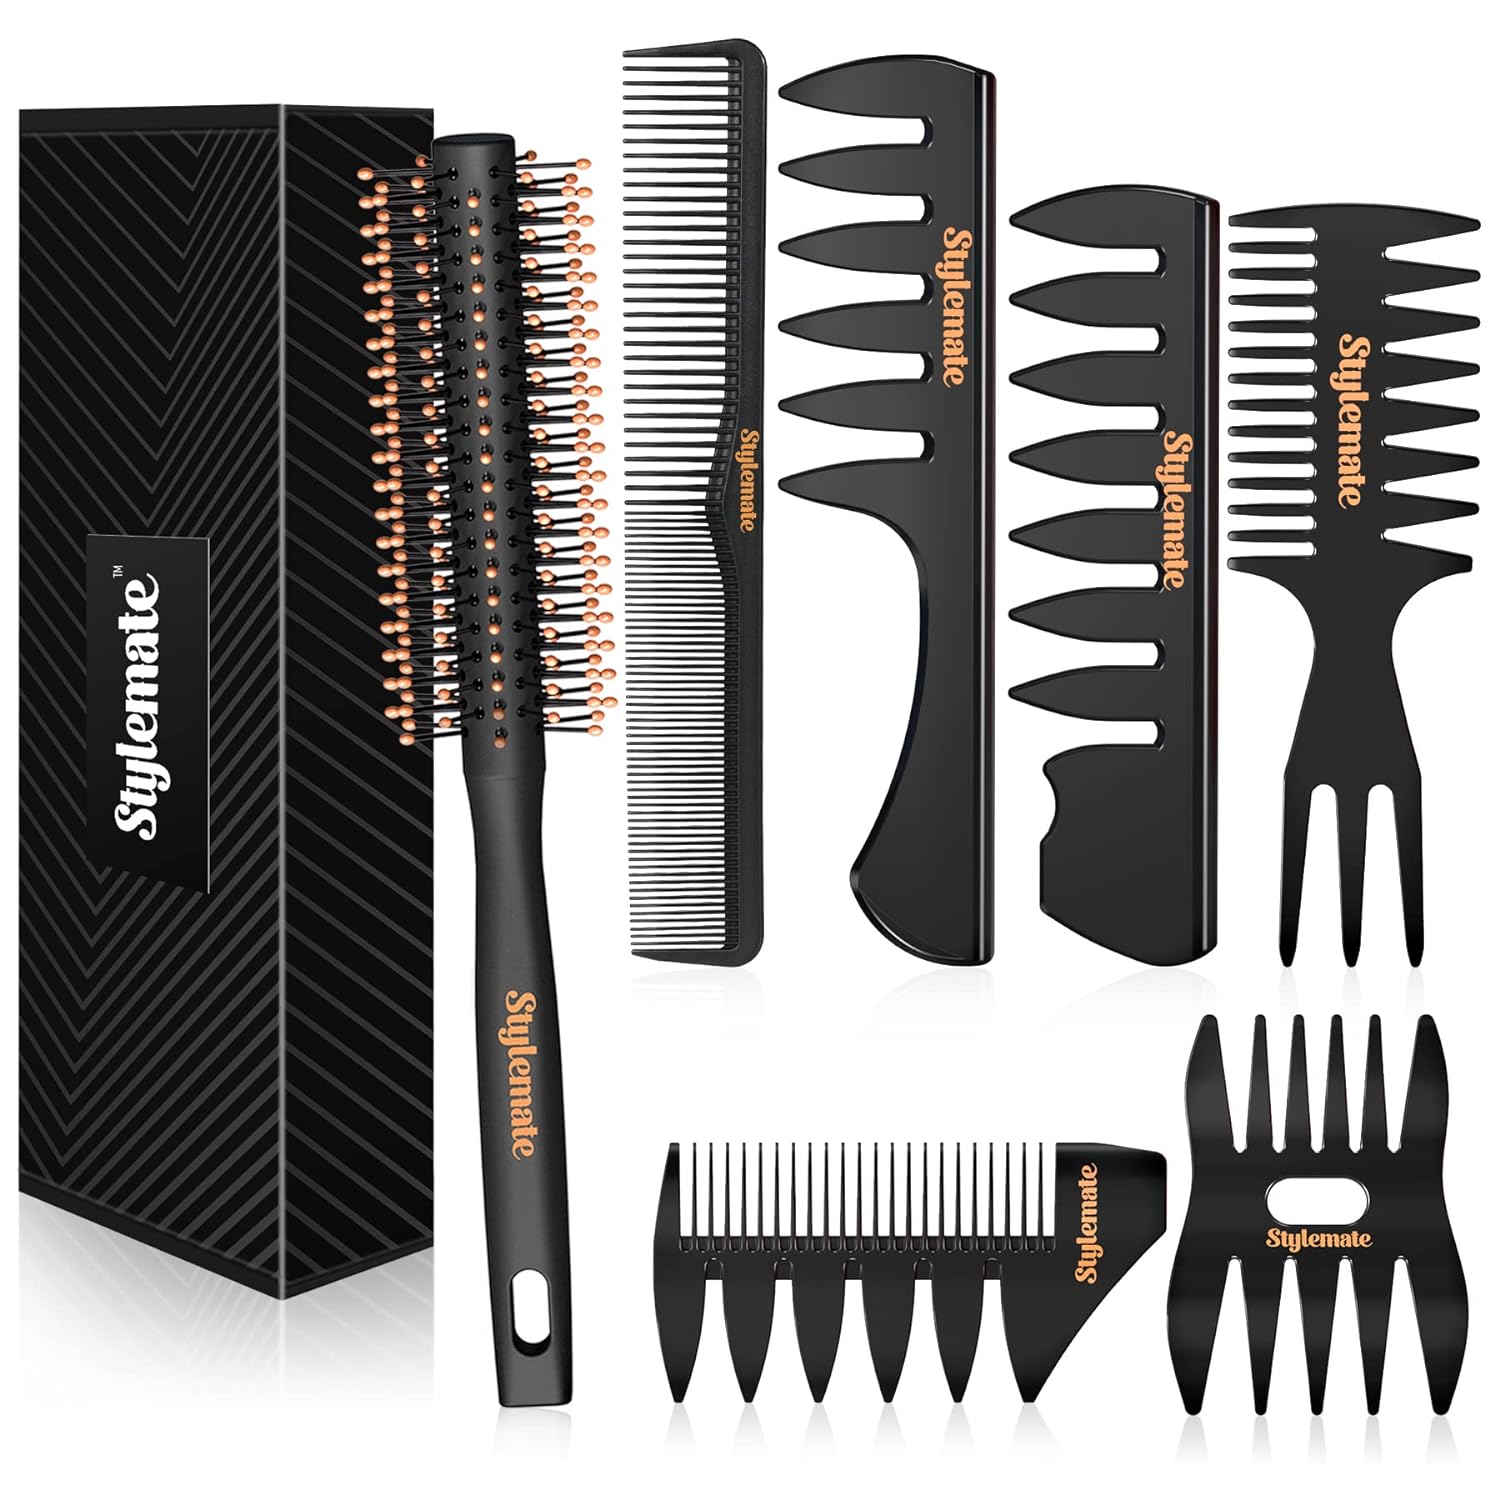 Stylemate Hair Styling Comb and Brush Set For Men